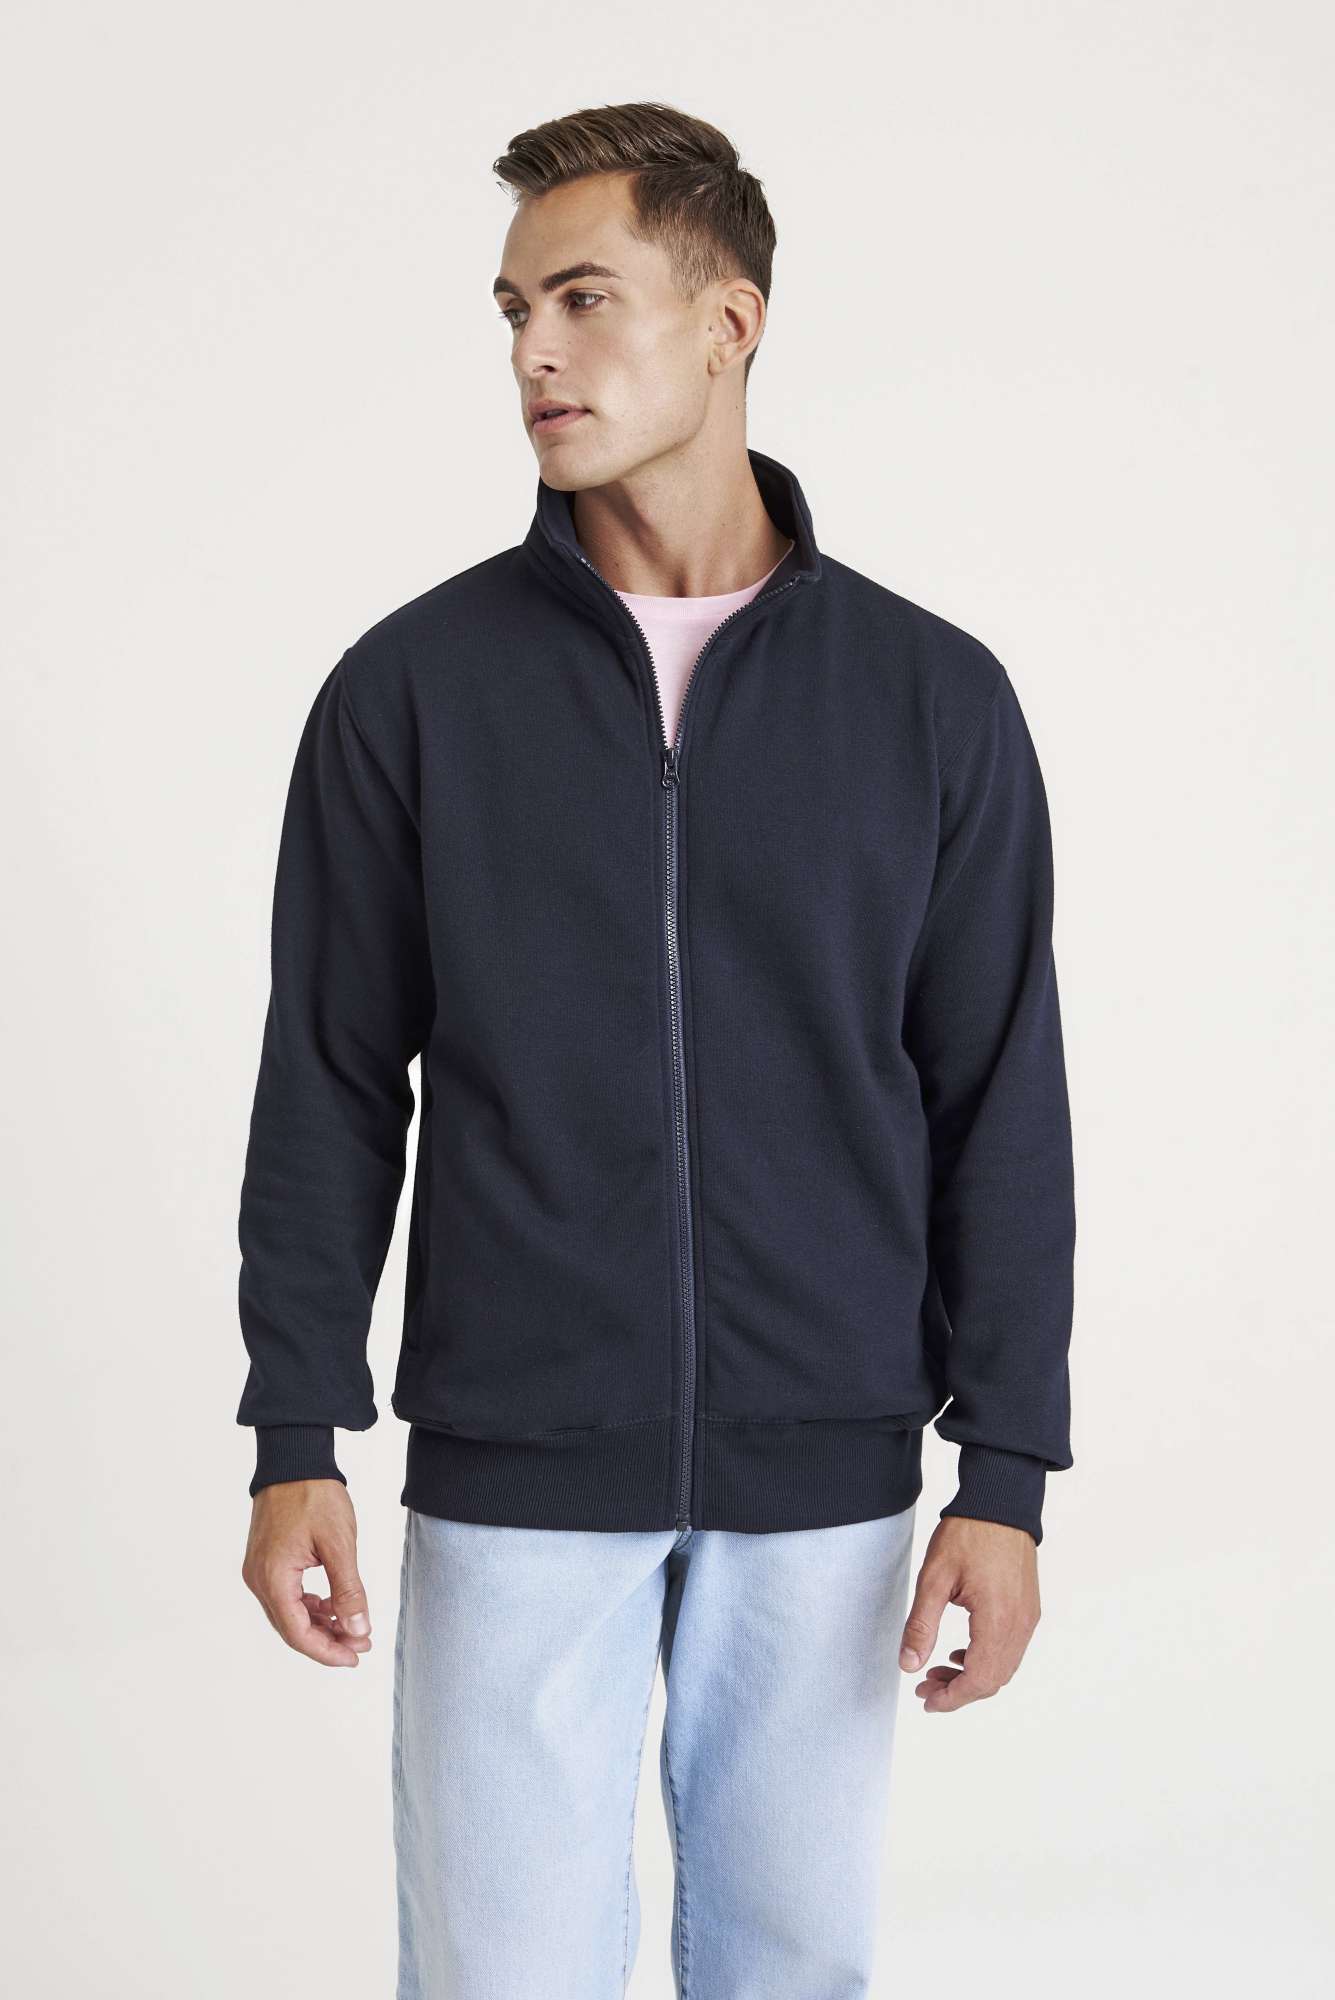 Just Hoods Campus Full Zip Sweat New French Navy M (JH147)